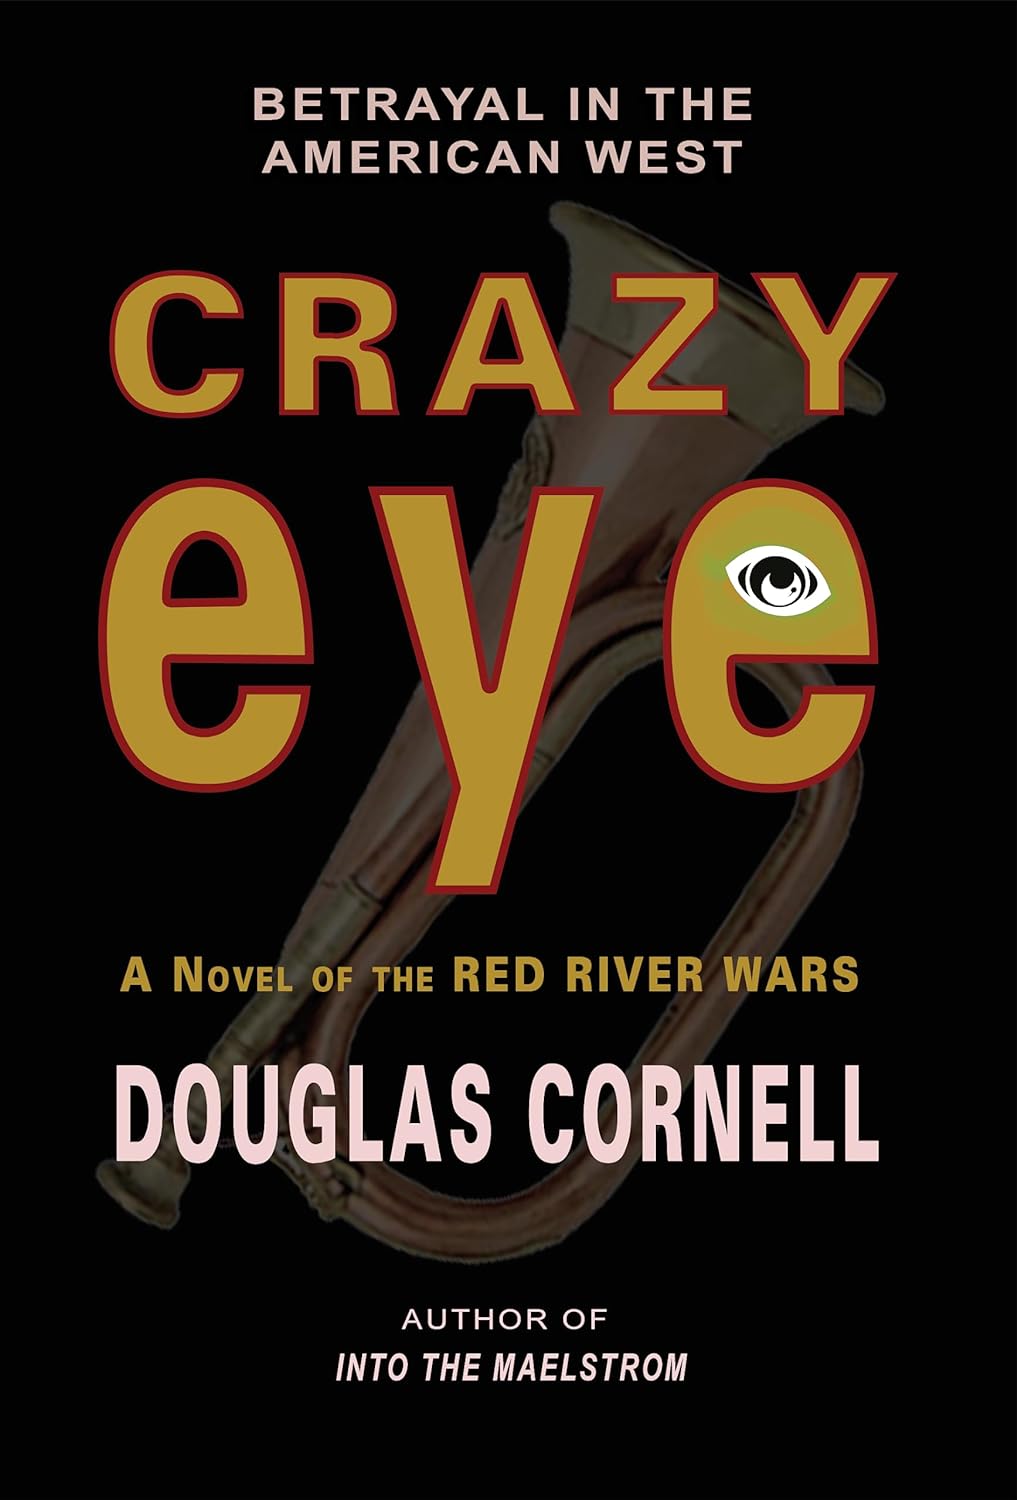 book with black cover and yellow writing "Crazy Eye"